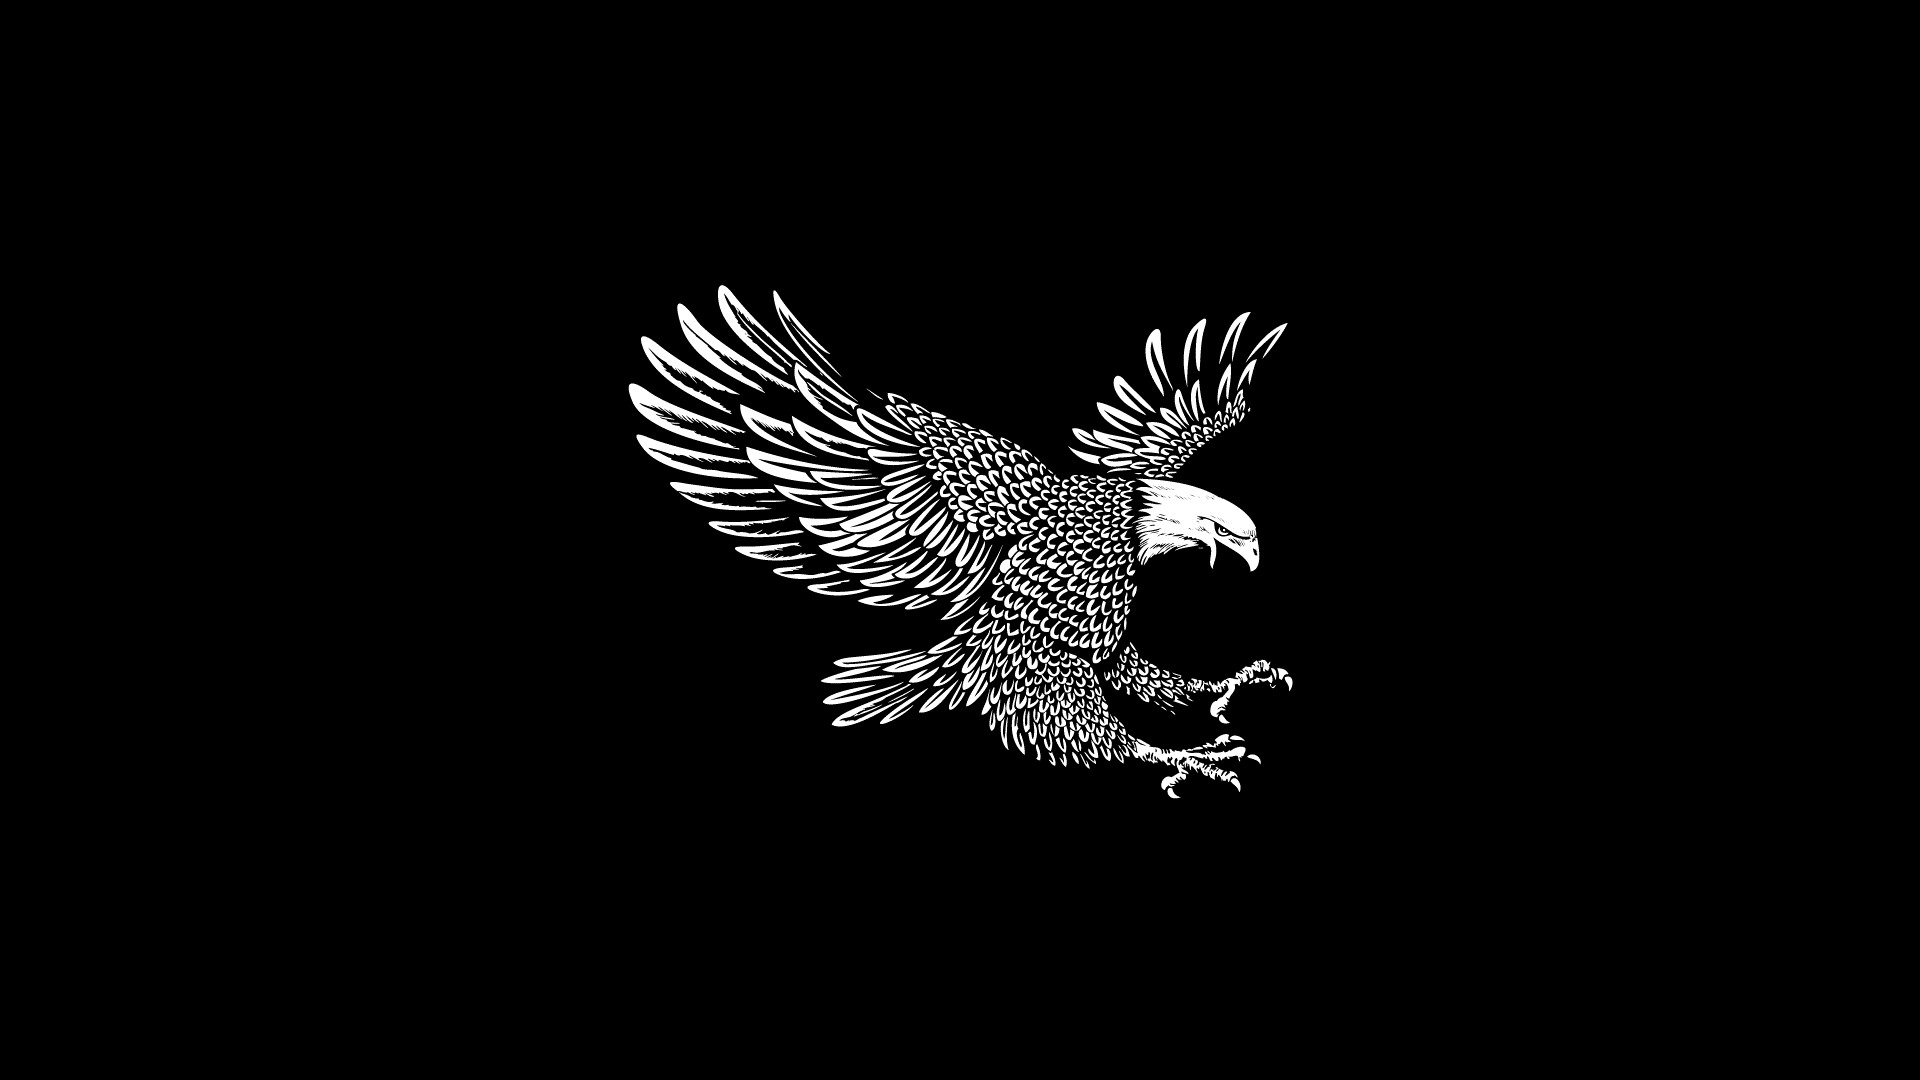 Eagle hd wallpapers, hd images, backgrounds